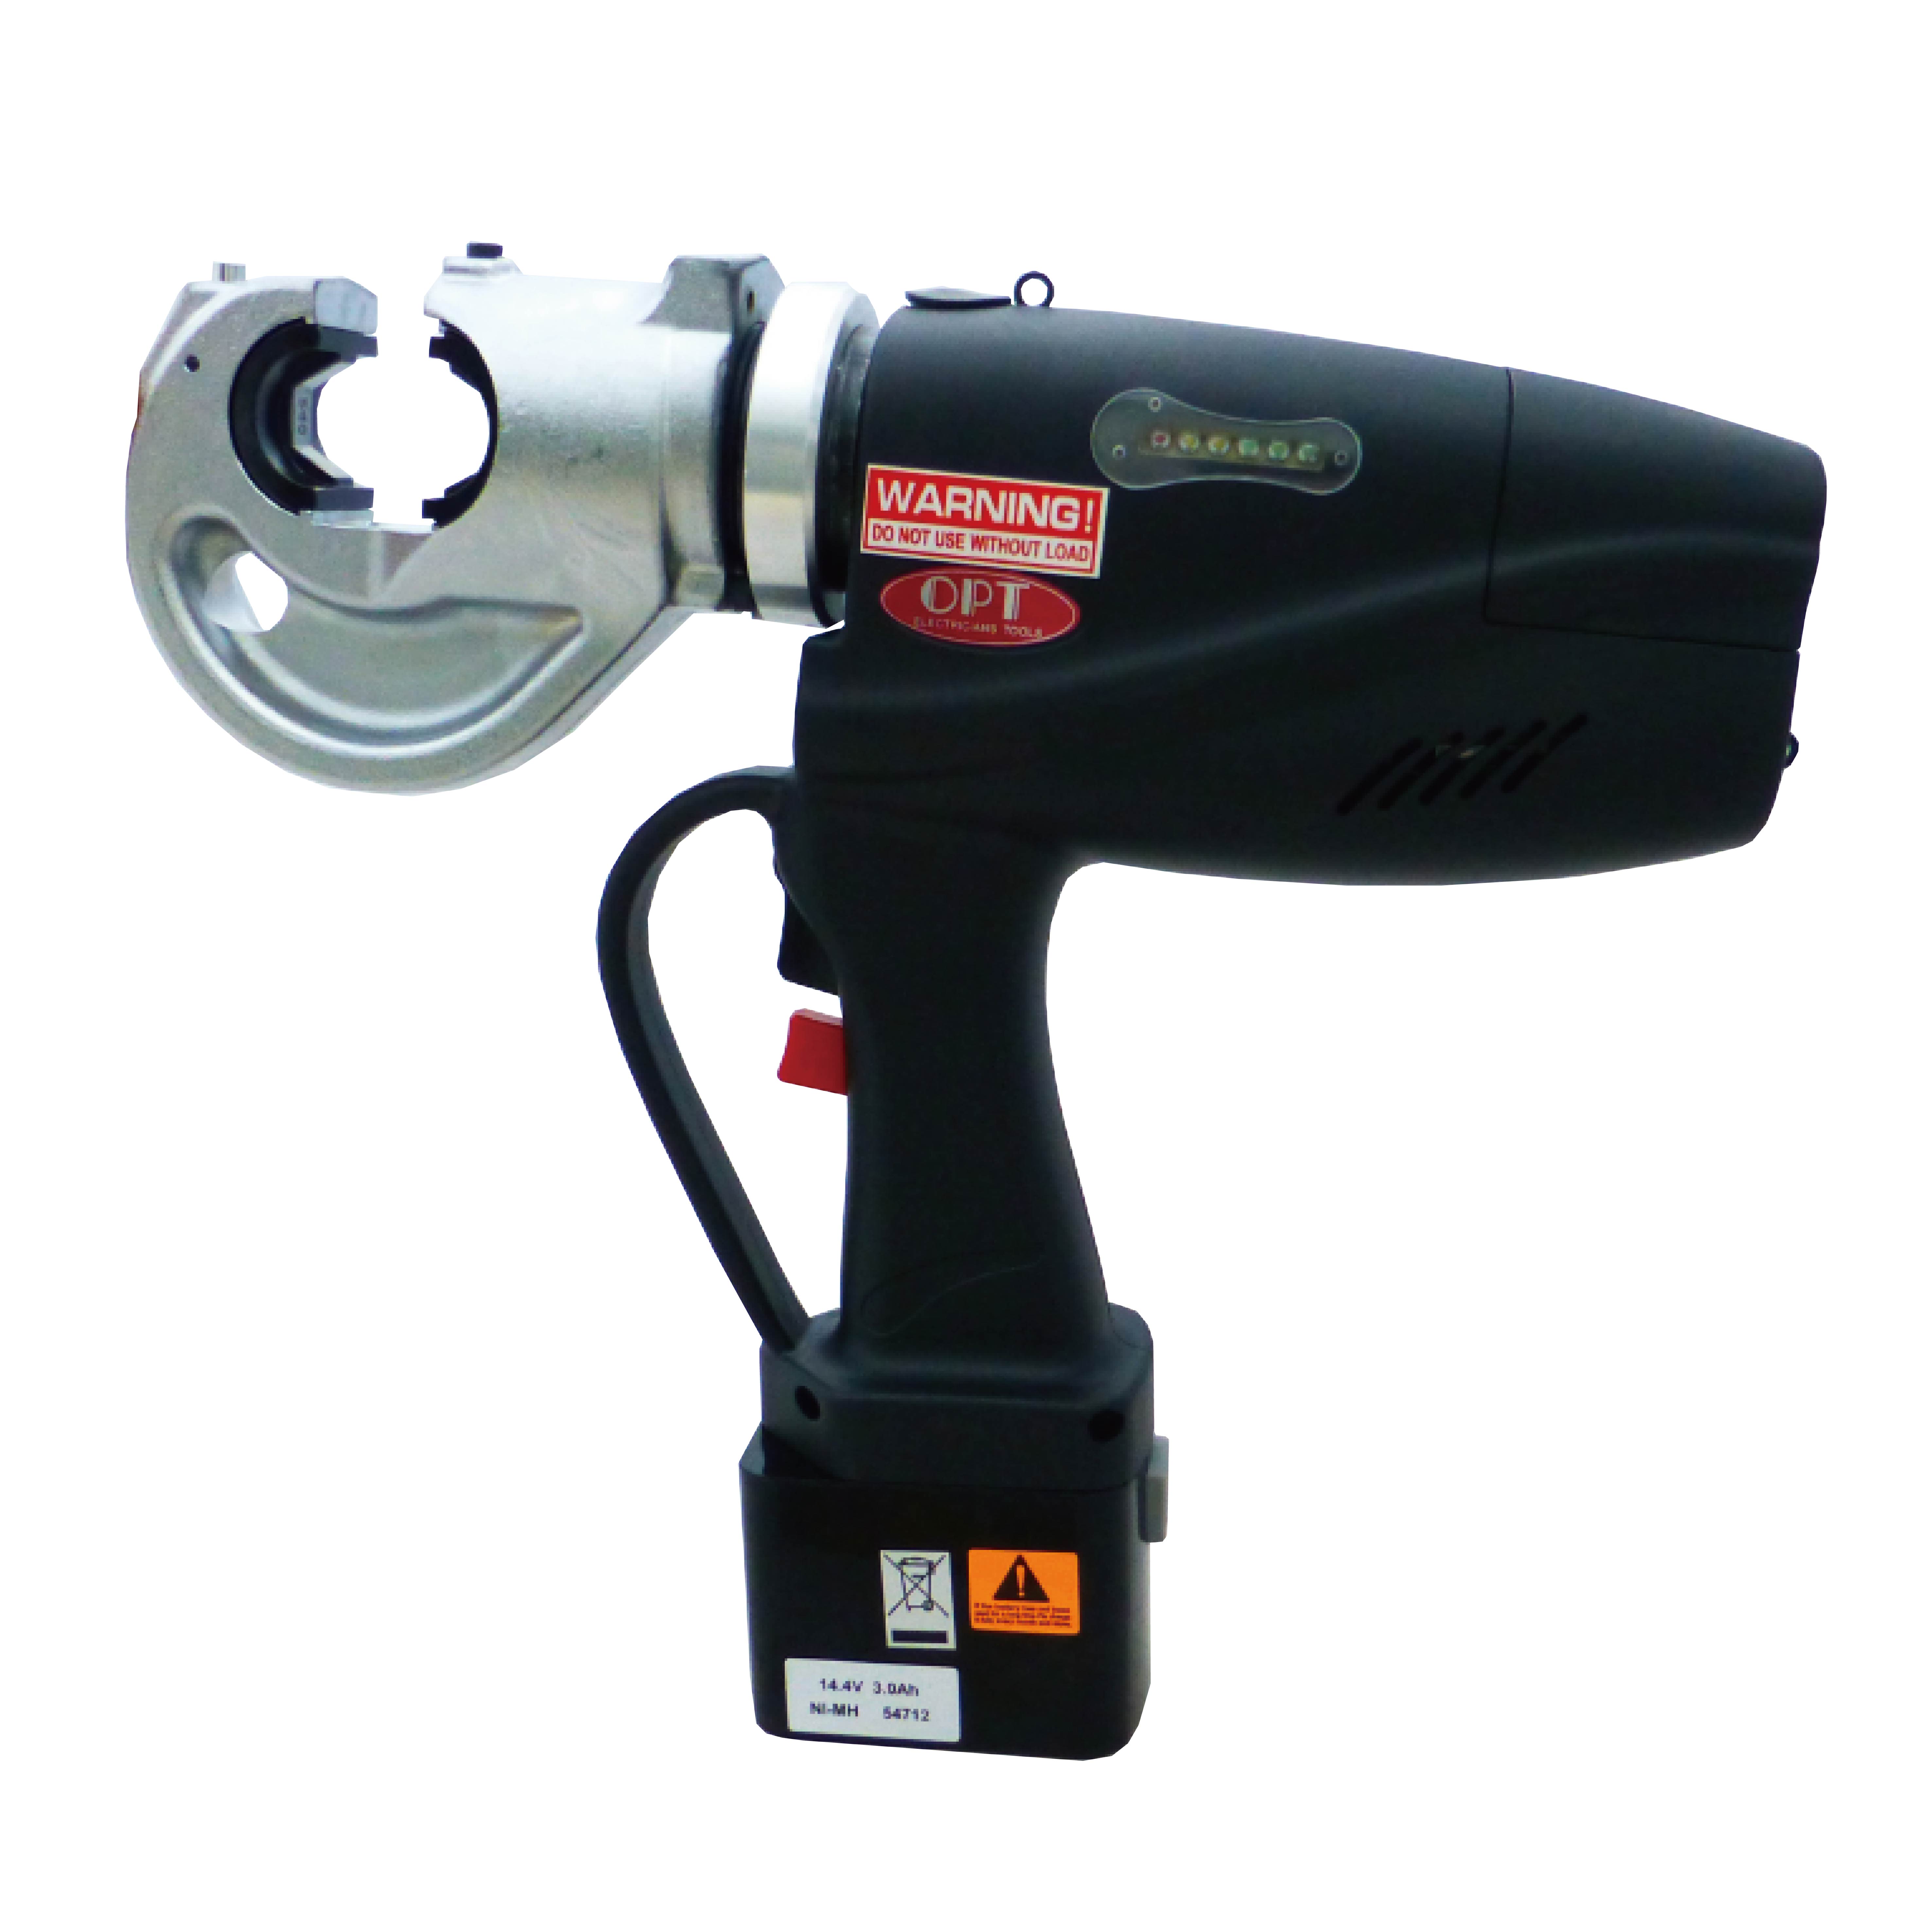 EPL-2501 CORDLESS HYDRAULIC CRIMPING TOOLS-EPL-2501